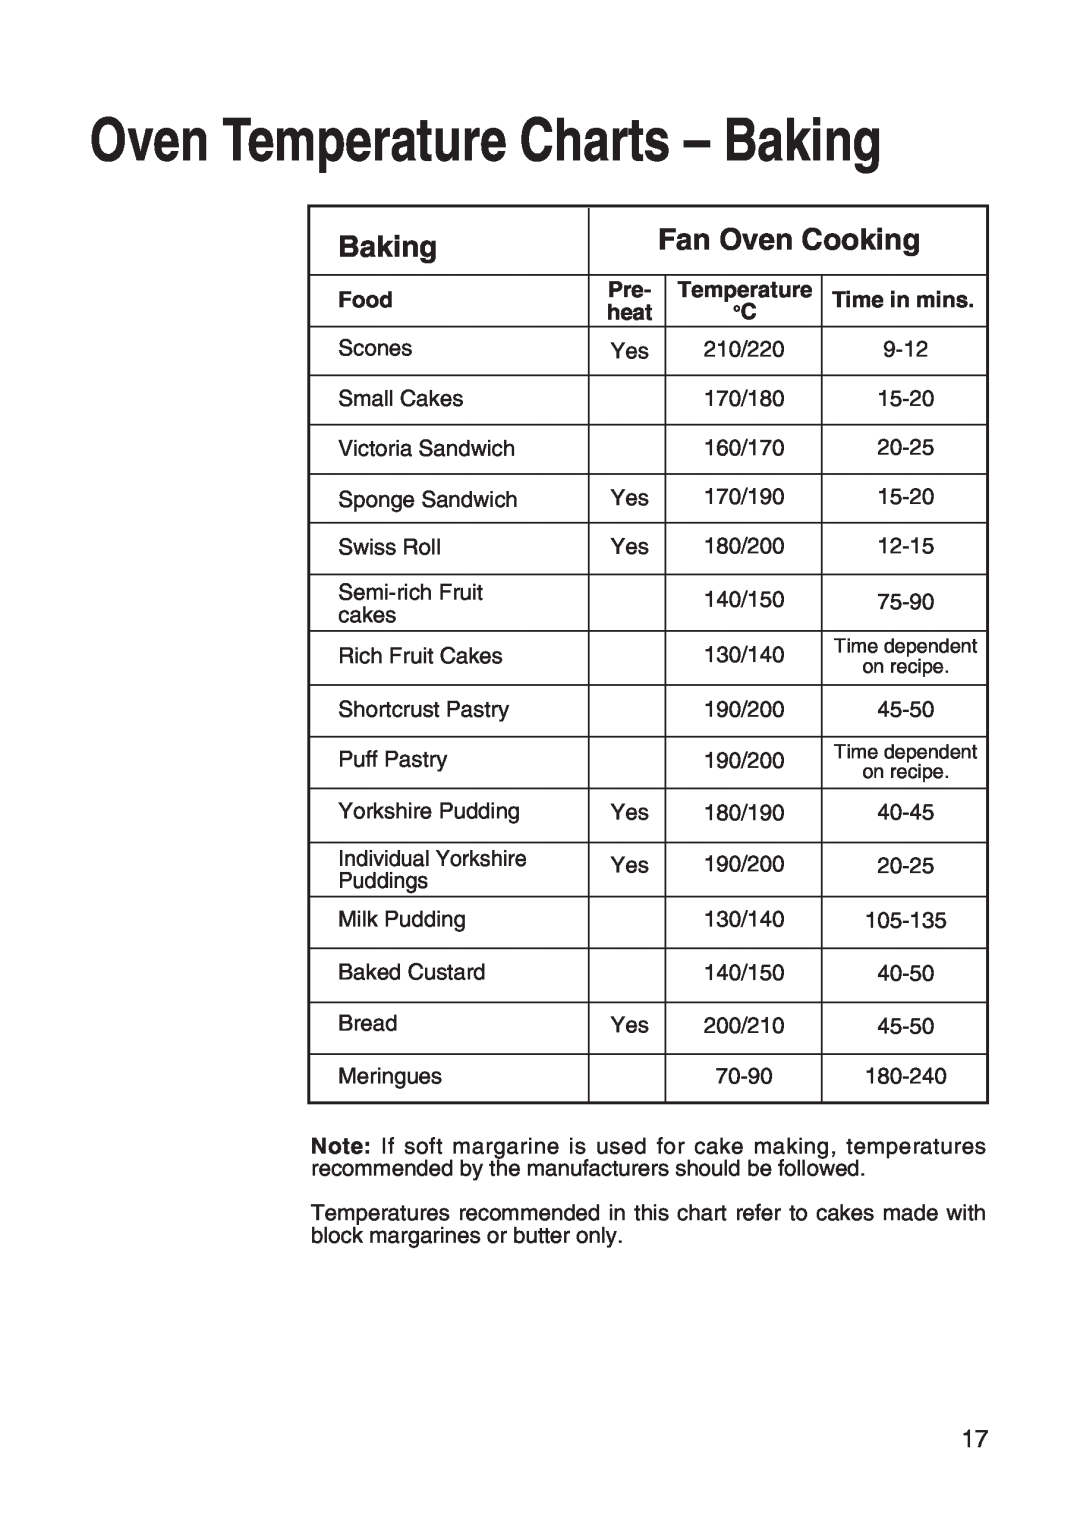 Hotpoint EW31 installation instructions Oven Temperature Charts - Baking, Fan Oven Cooking, Food, Time in mins, heat 